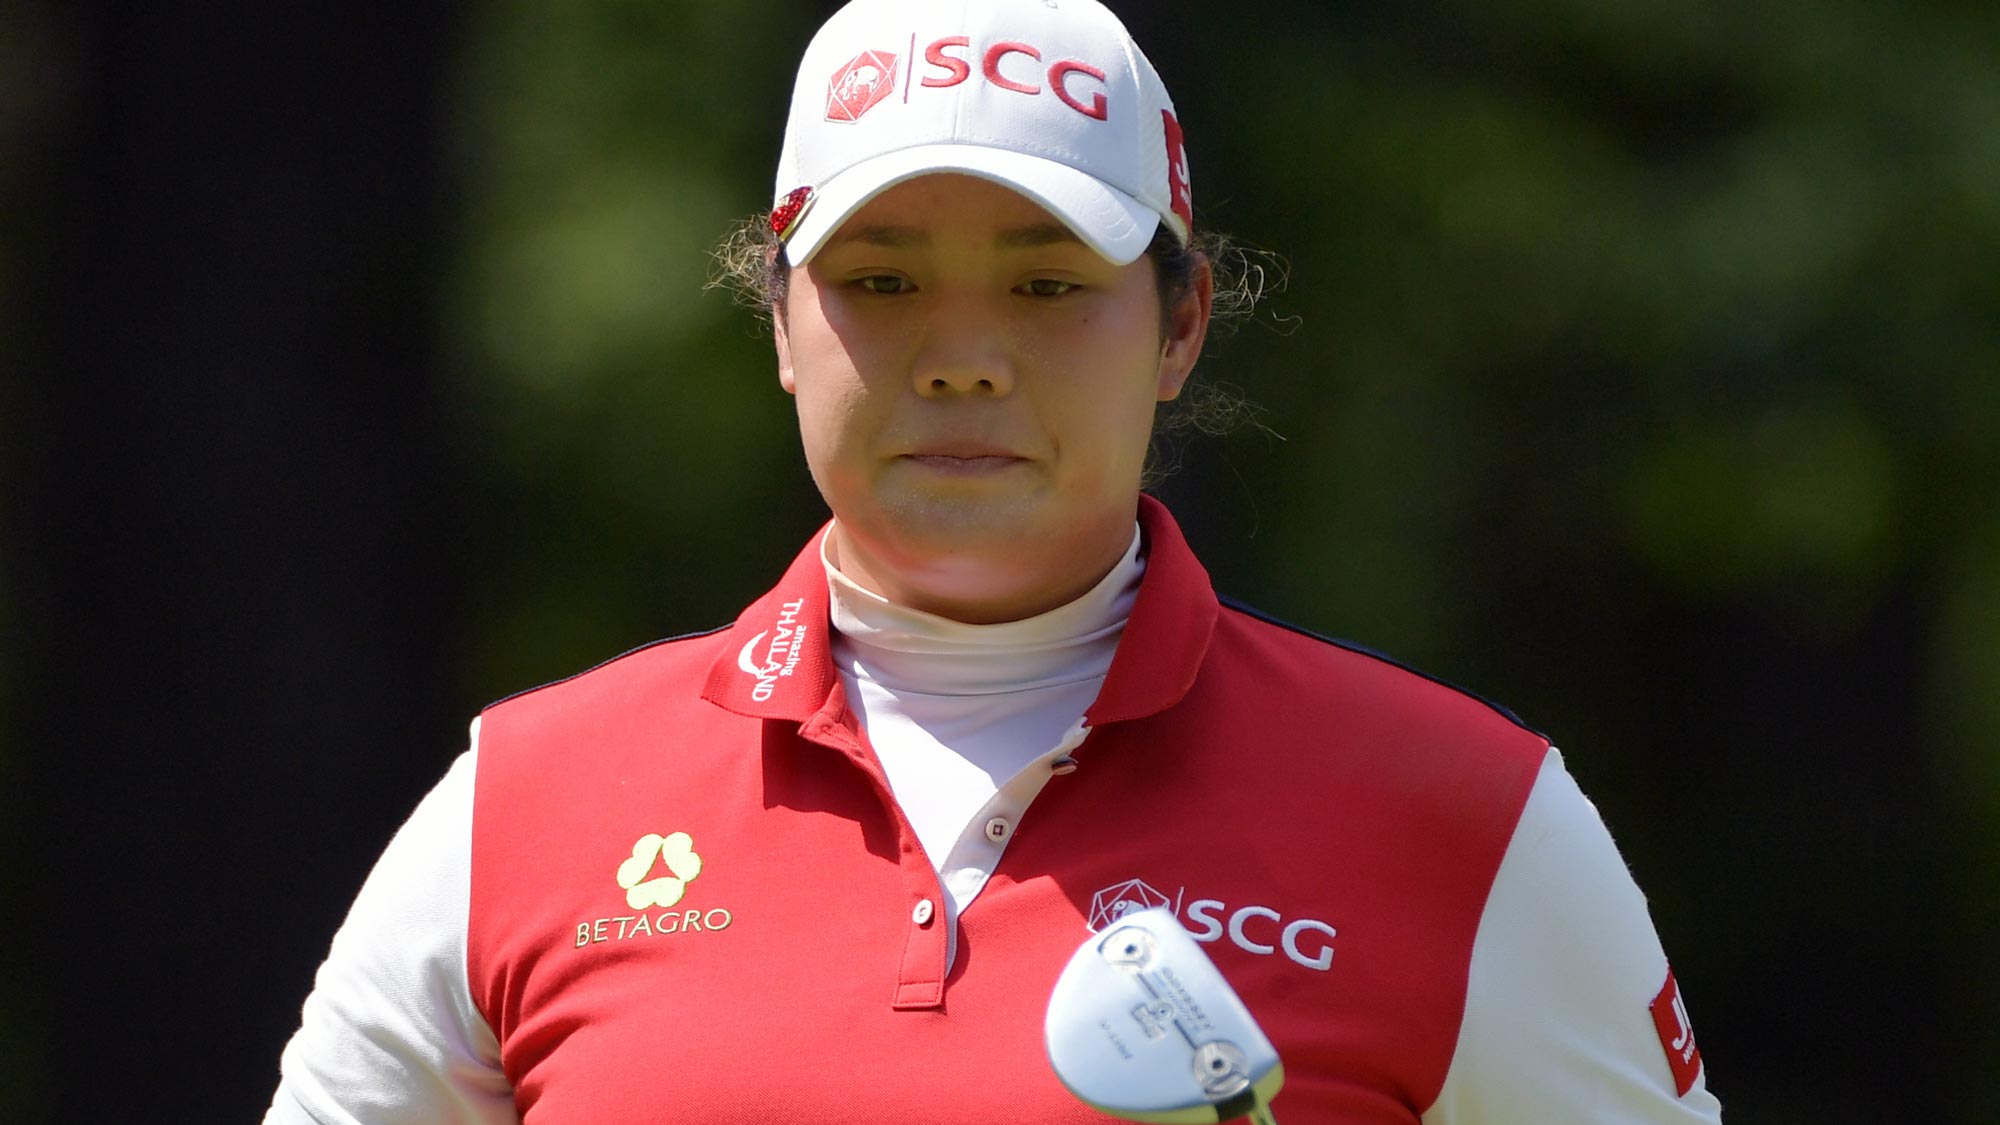 Ariya Jutanugarn of Thailand walks from the first hole after a birdie during the third round of the 2018 U.S. Women's Open